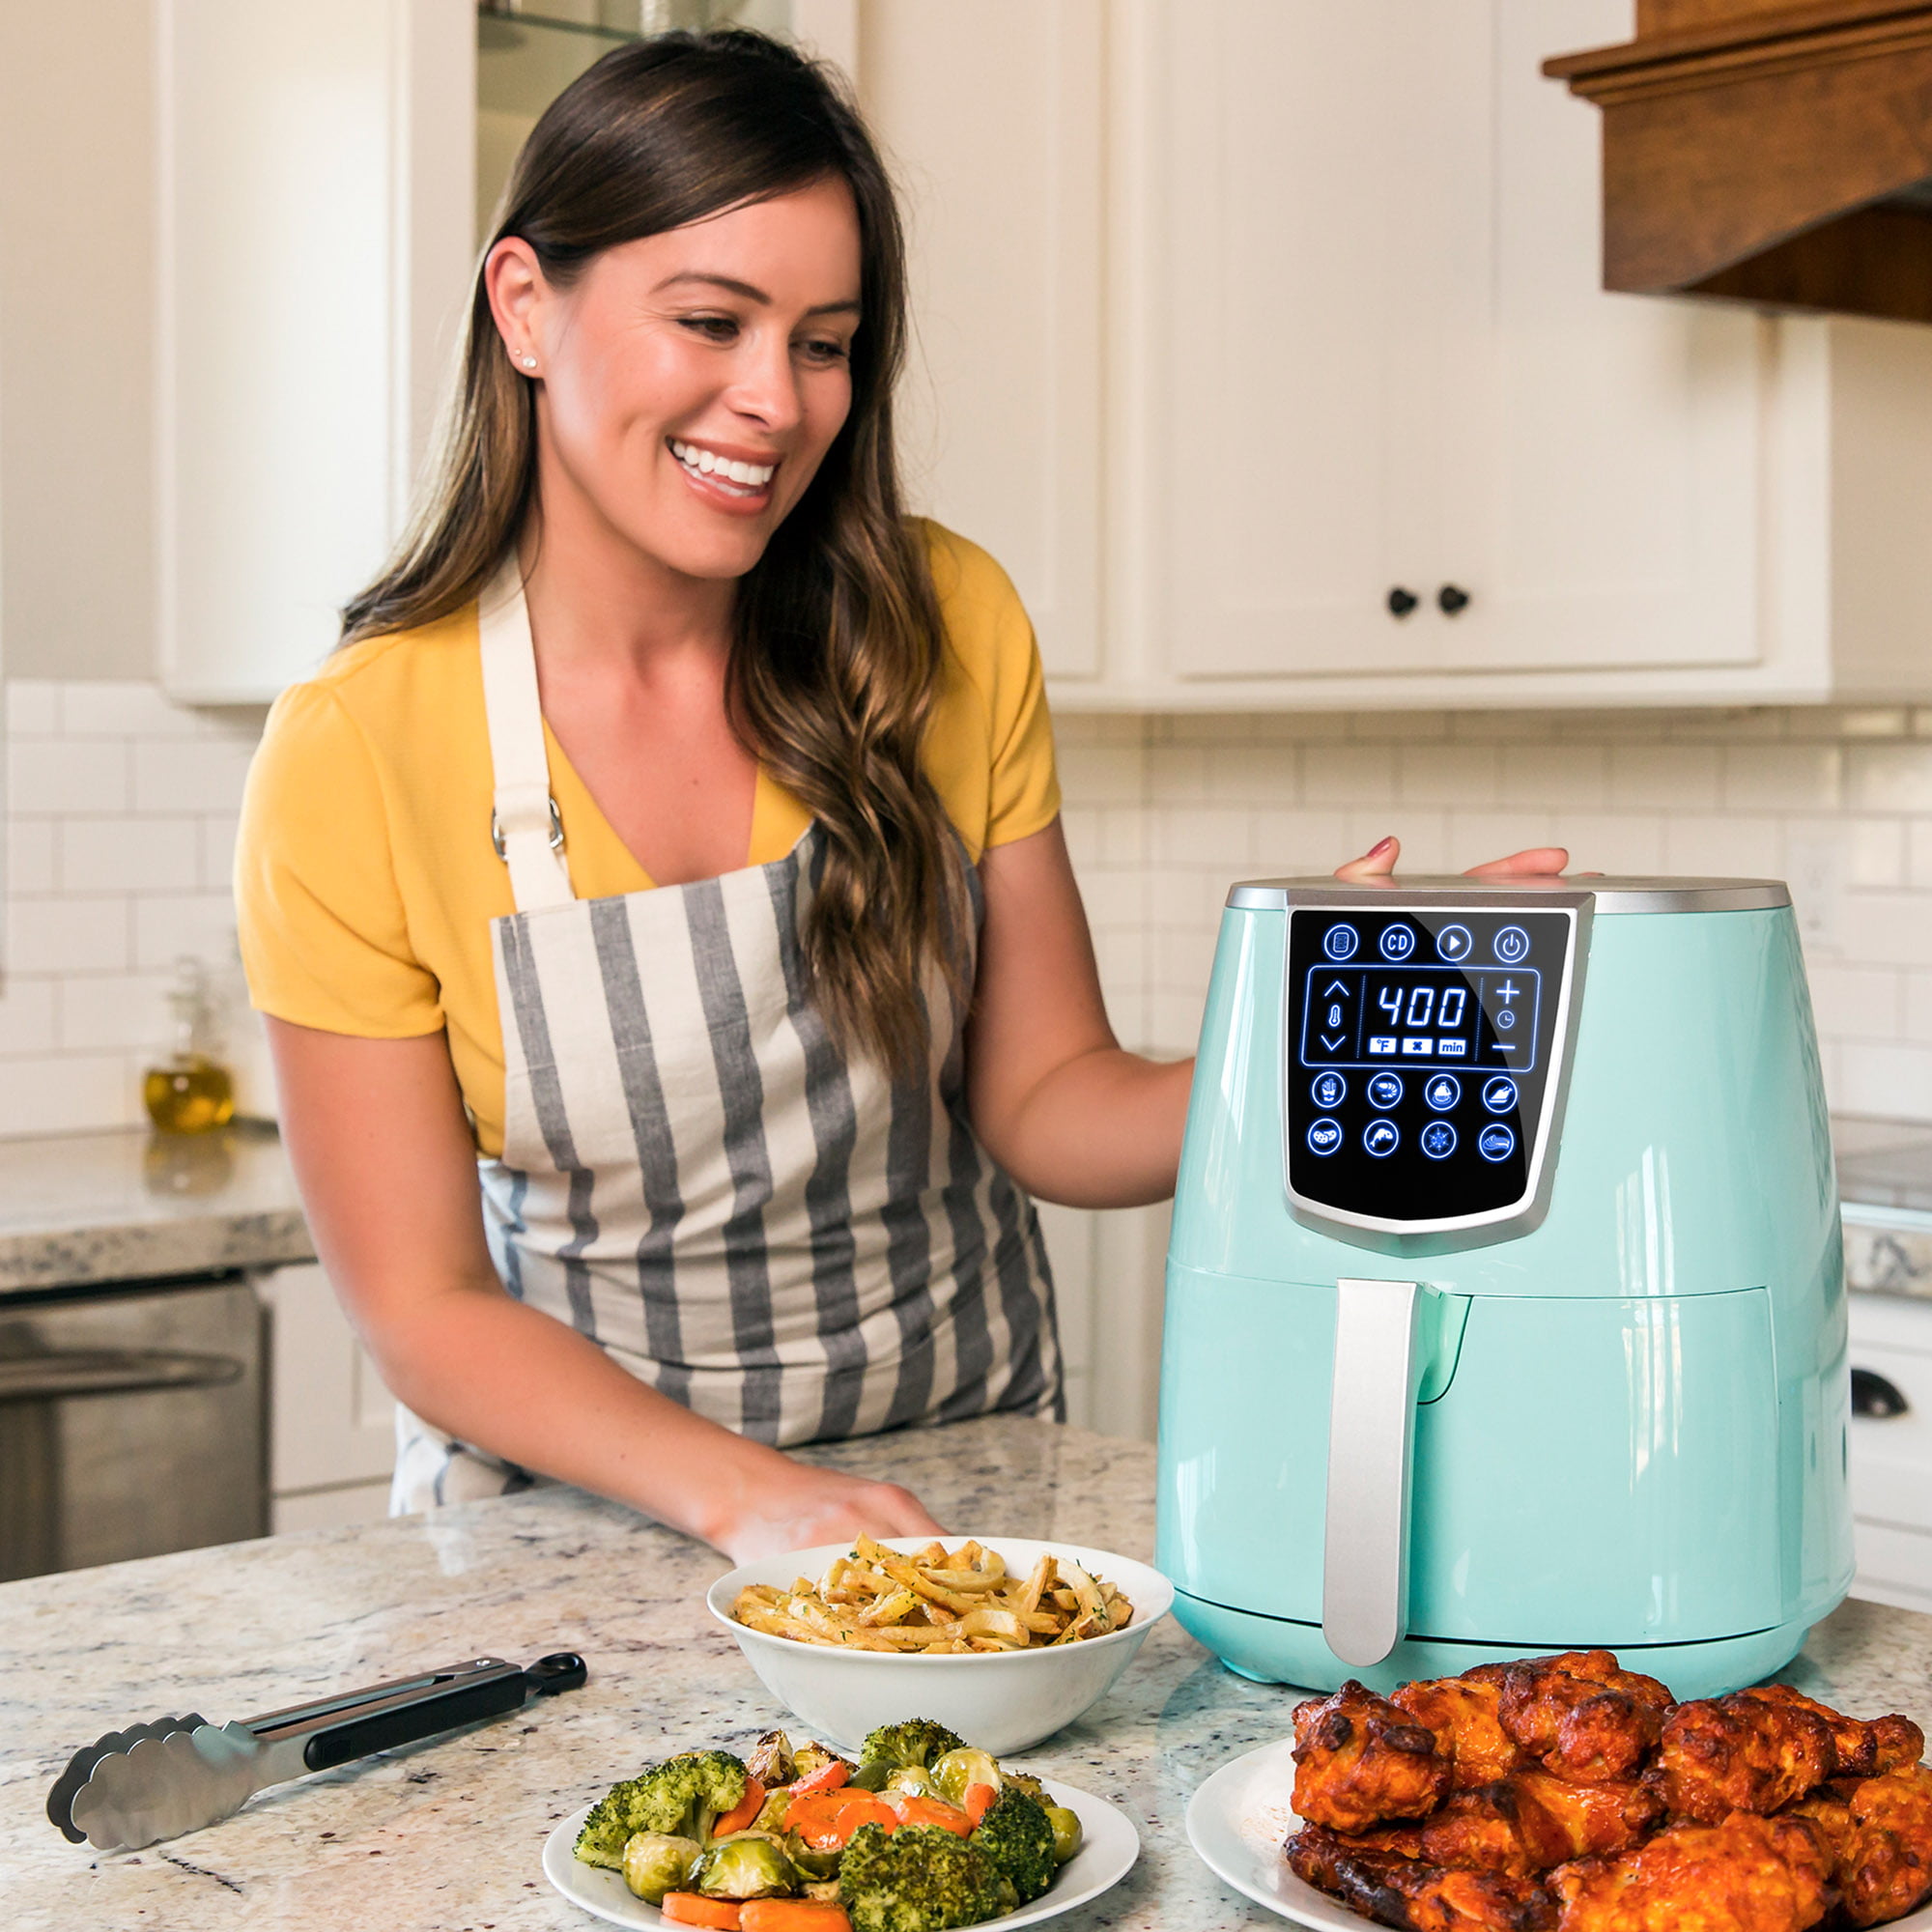 Multifunctional Rack Recipes Adjustable Temp Seafoam Blue Tongs Best Choice Products 4.2qt 8-in-1 Digital Air Fryer Cooking Appliance with 8 Presets Timer Touch Screen Display Non-Stick Basket 